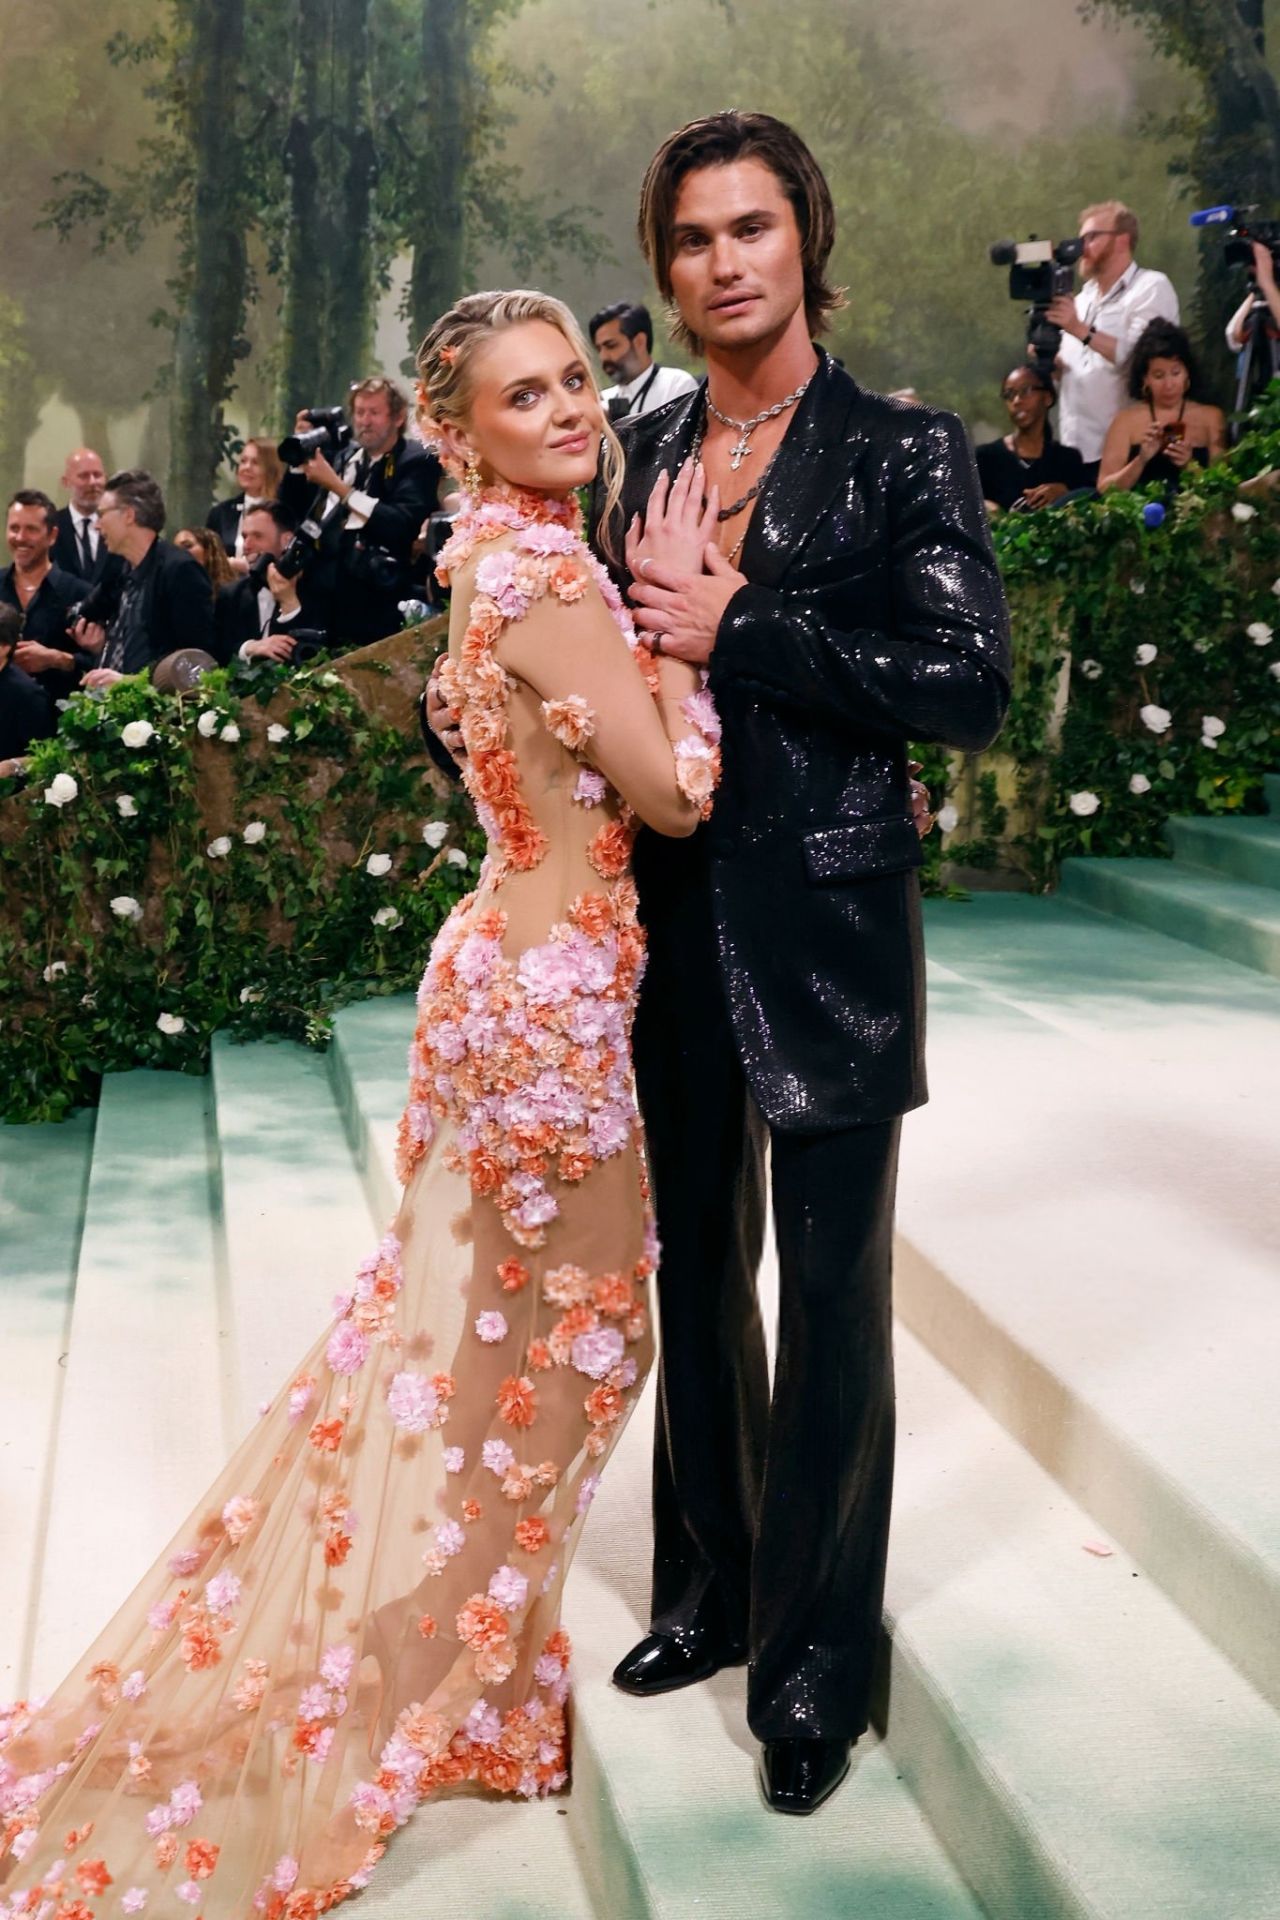 KELSEA BALLERINI AND CHASE STOKES MAKE A STUNNING DEBUT AT THE 2024 MET GALA IN NEW YORK